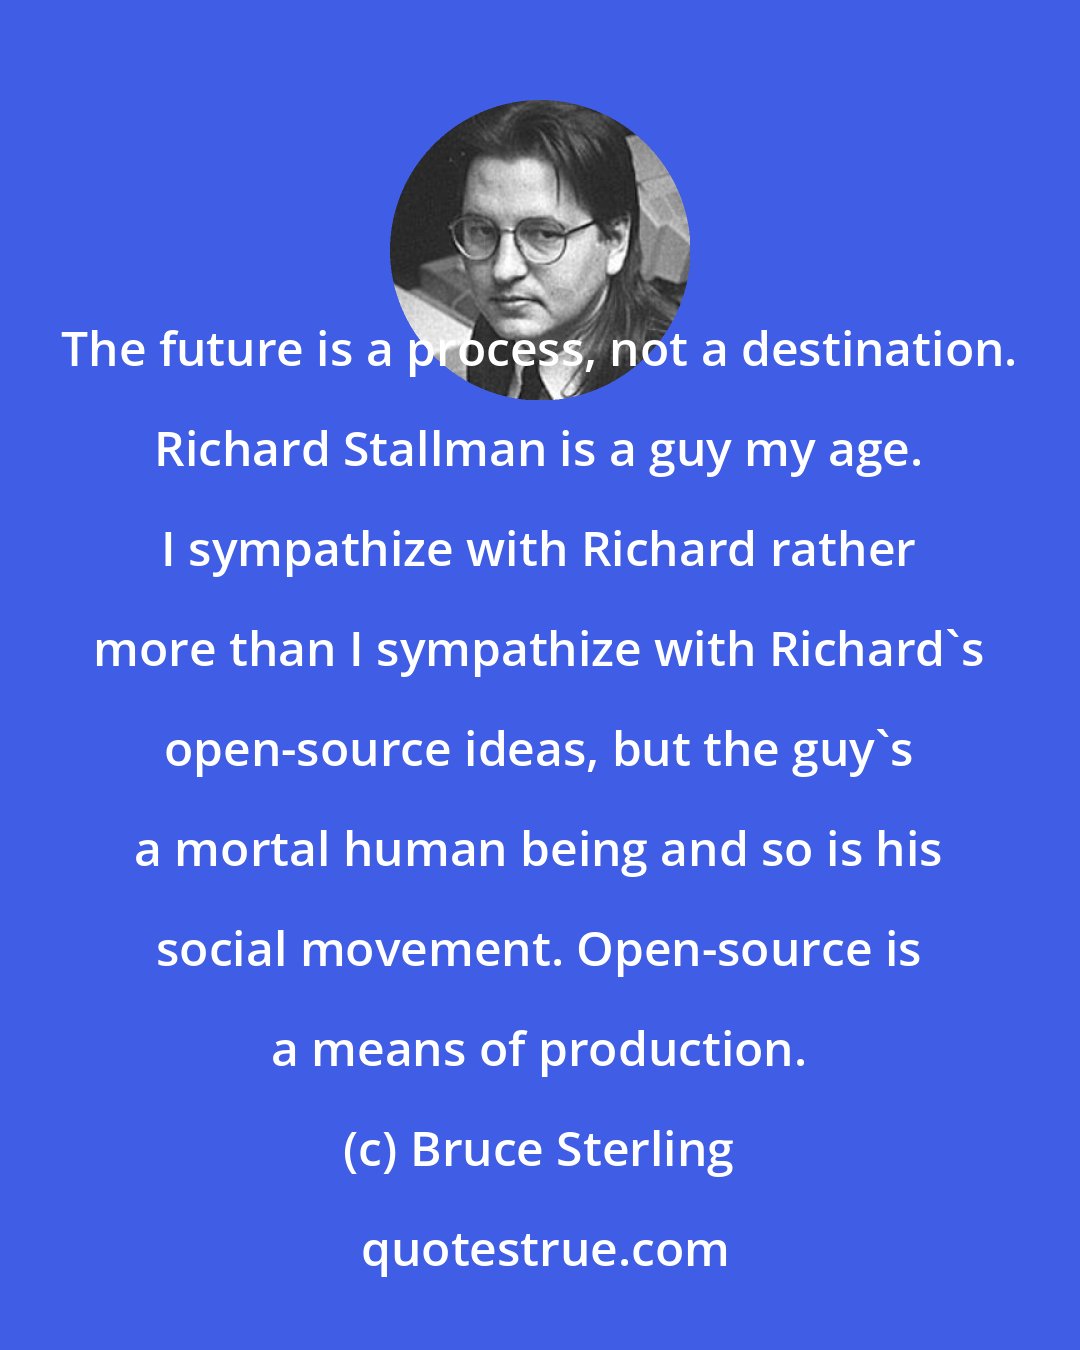 Bruce Sterling: The future is a process, not a destination. Richard Stallman is a guy my age. I sympathize with Richard rather more than I sympathize with Richard's open-source ideas, but the guy's a mortal human being and so is his social movement. Open-source is a means of production.